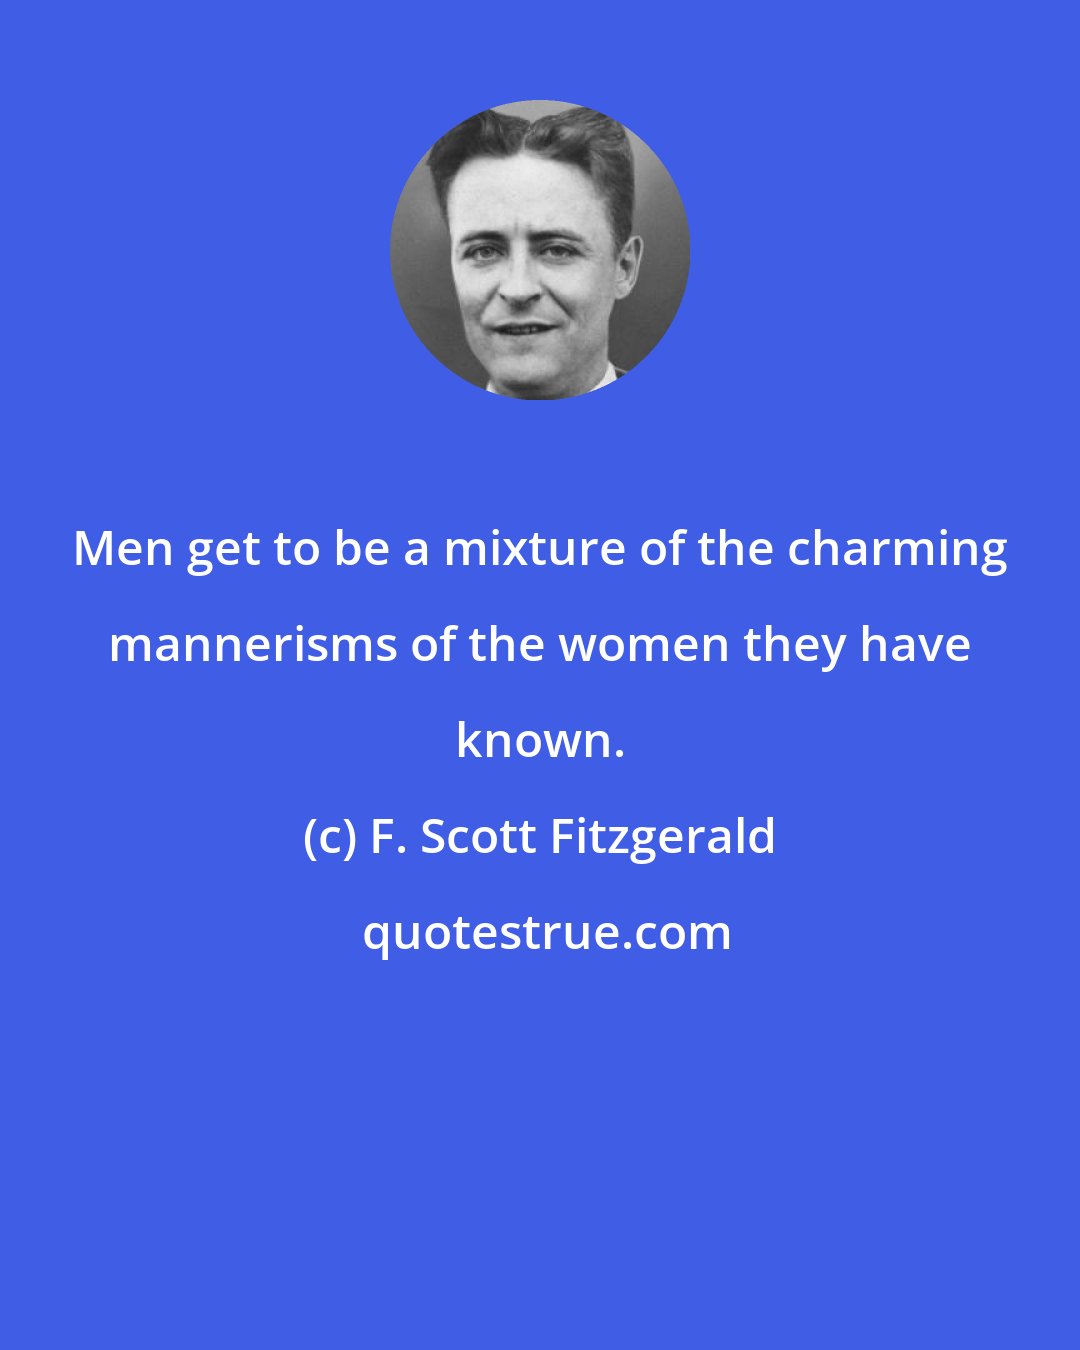 F. Scott Fitzgerald: Men get to be a mixture of the charming mannerisms of the women they have known.